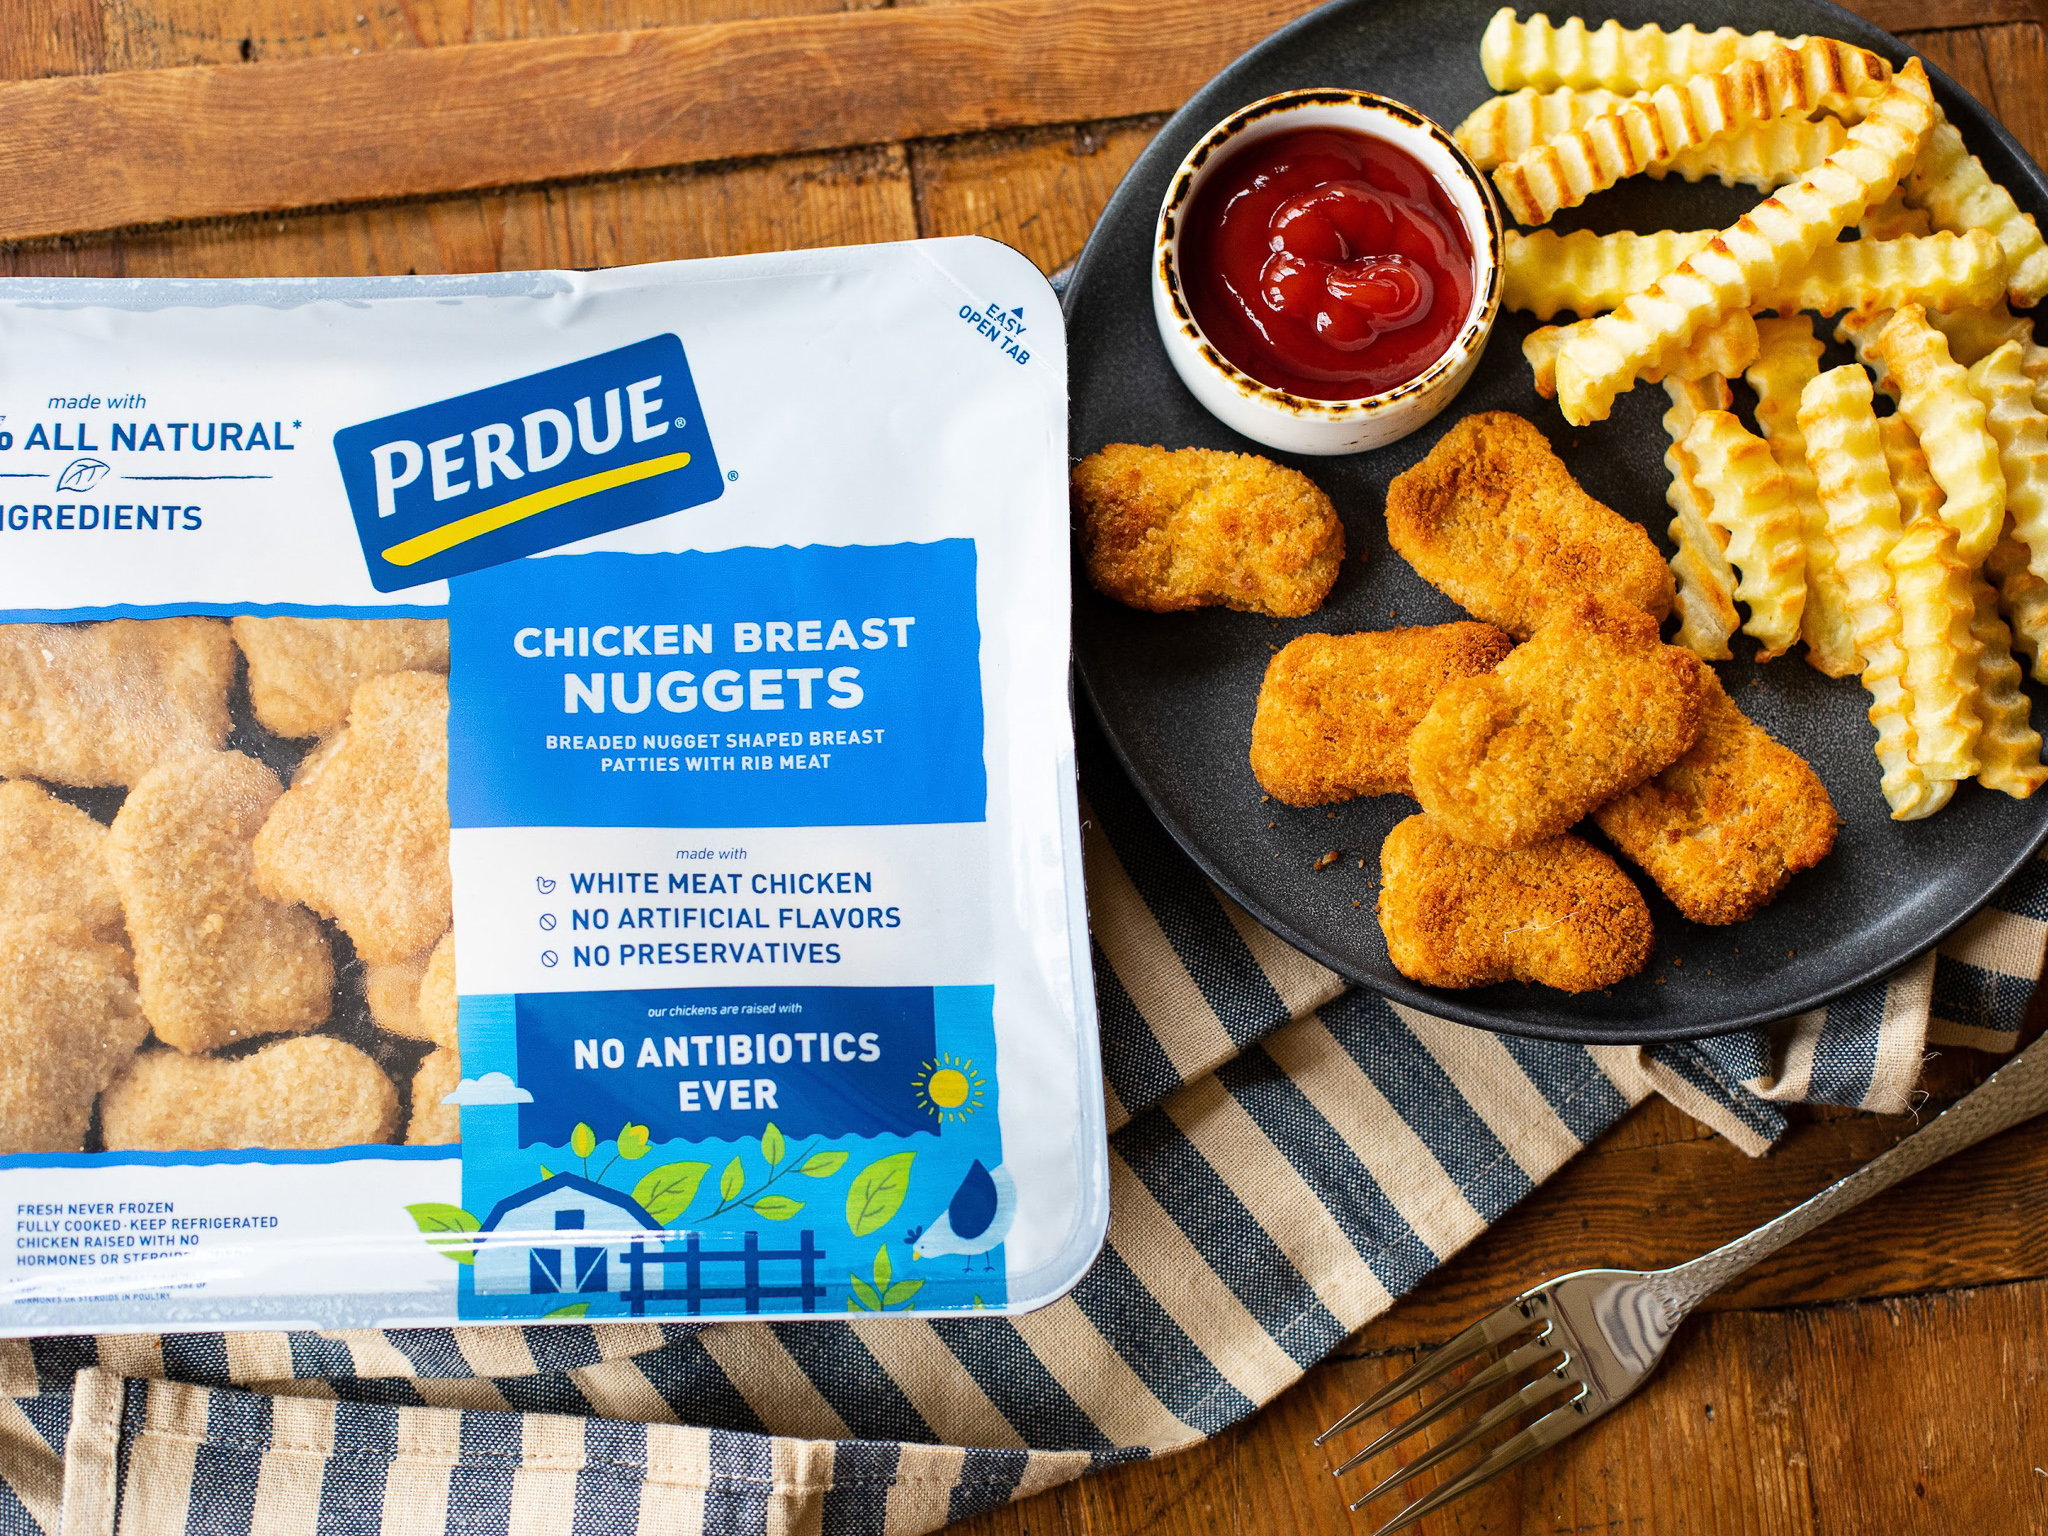 Perdue Breaded Chicken Just $2.83 Per Pack At Publix